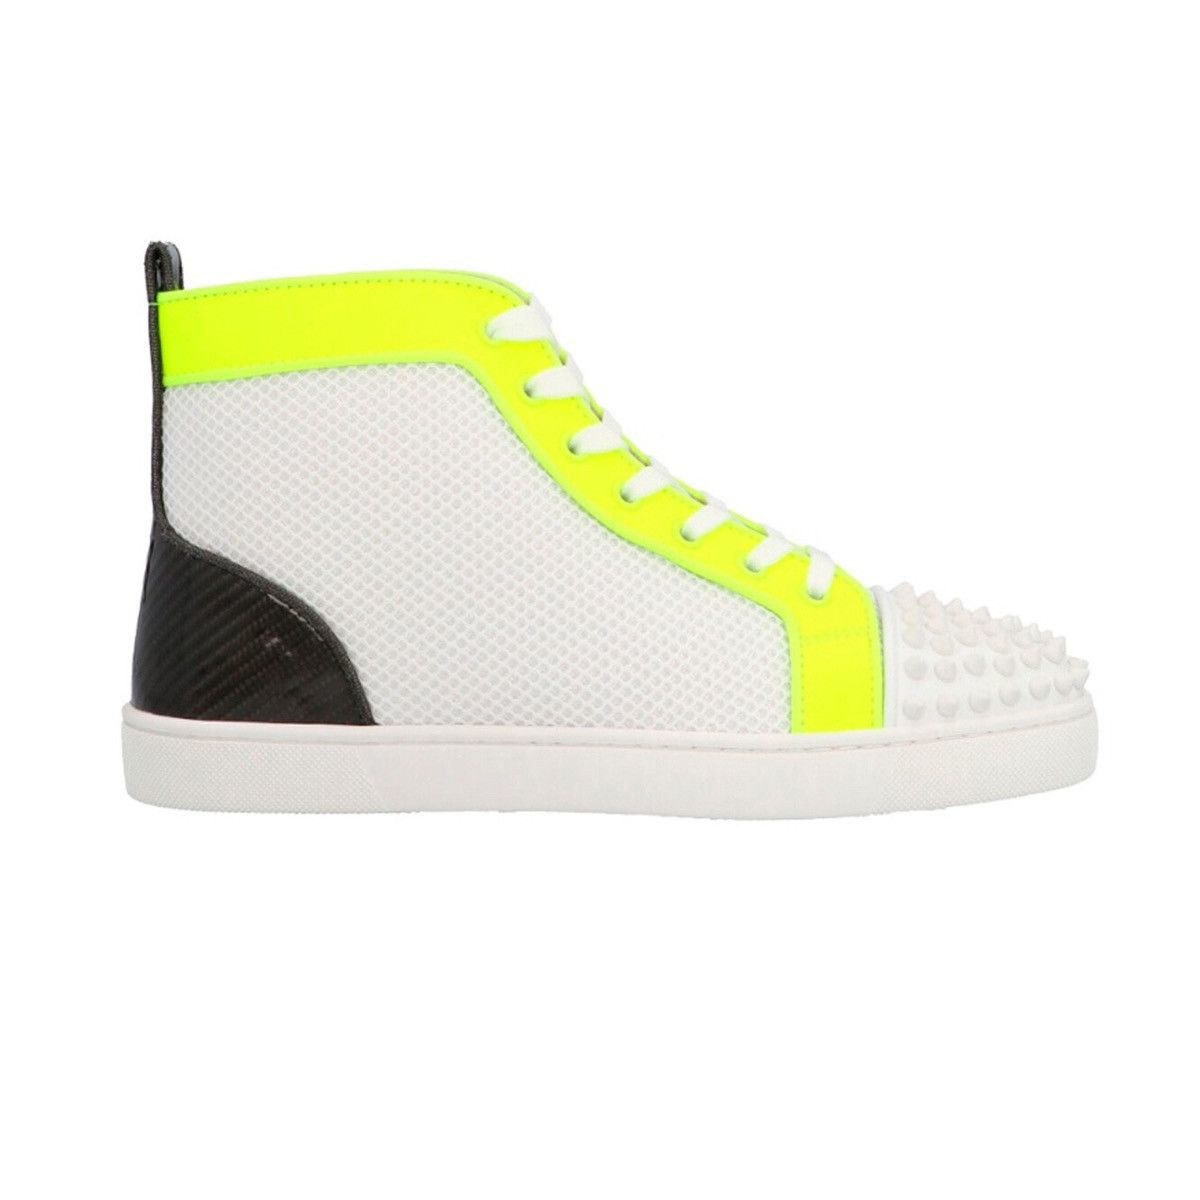 Louboutin Louboutin High-top Spikes Sneakers | Grailed